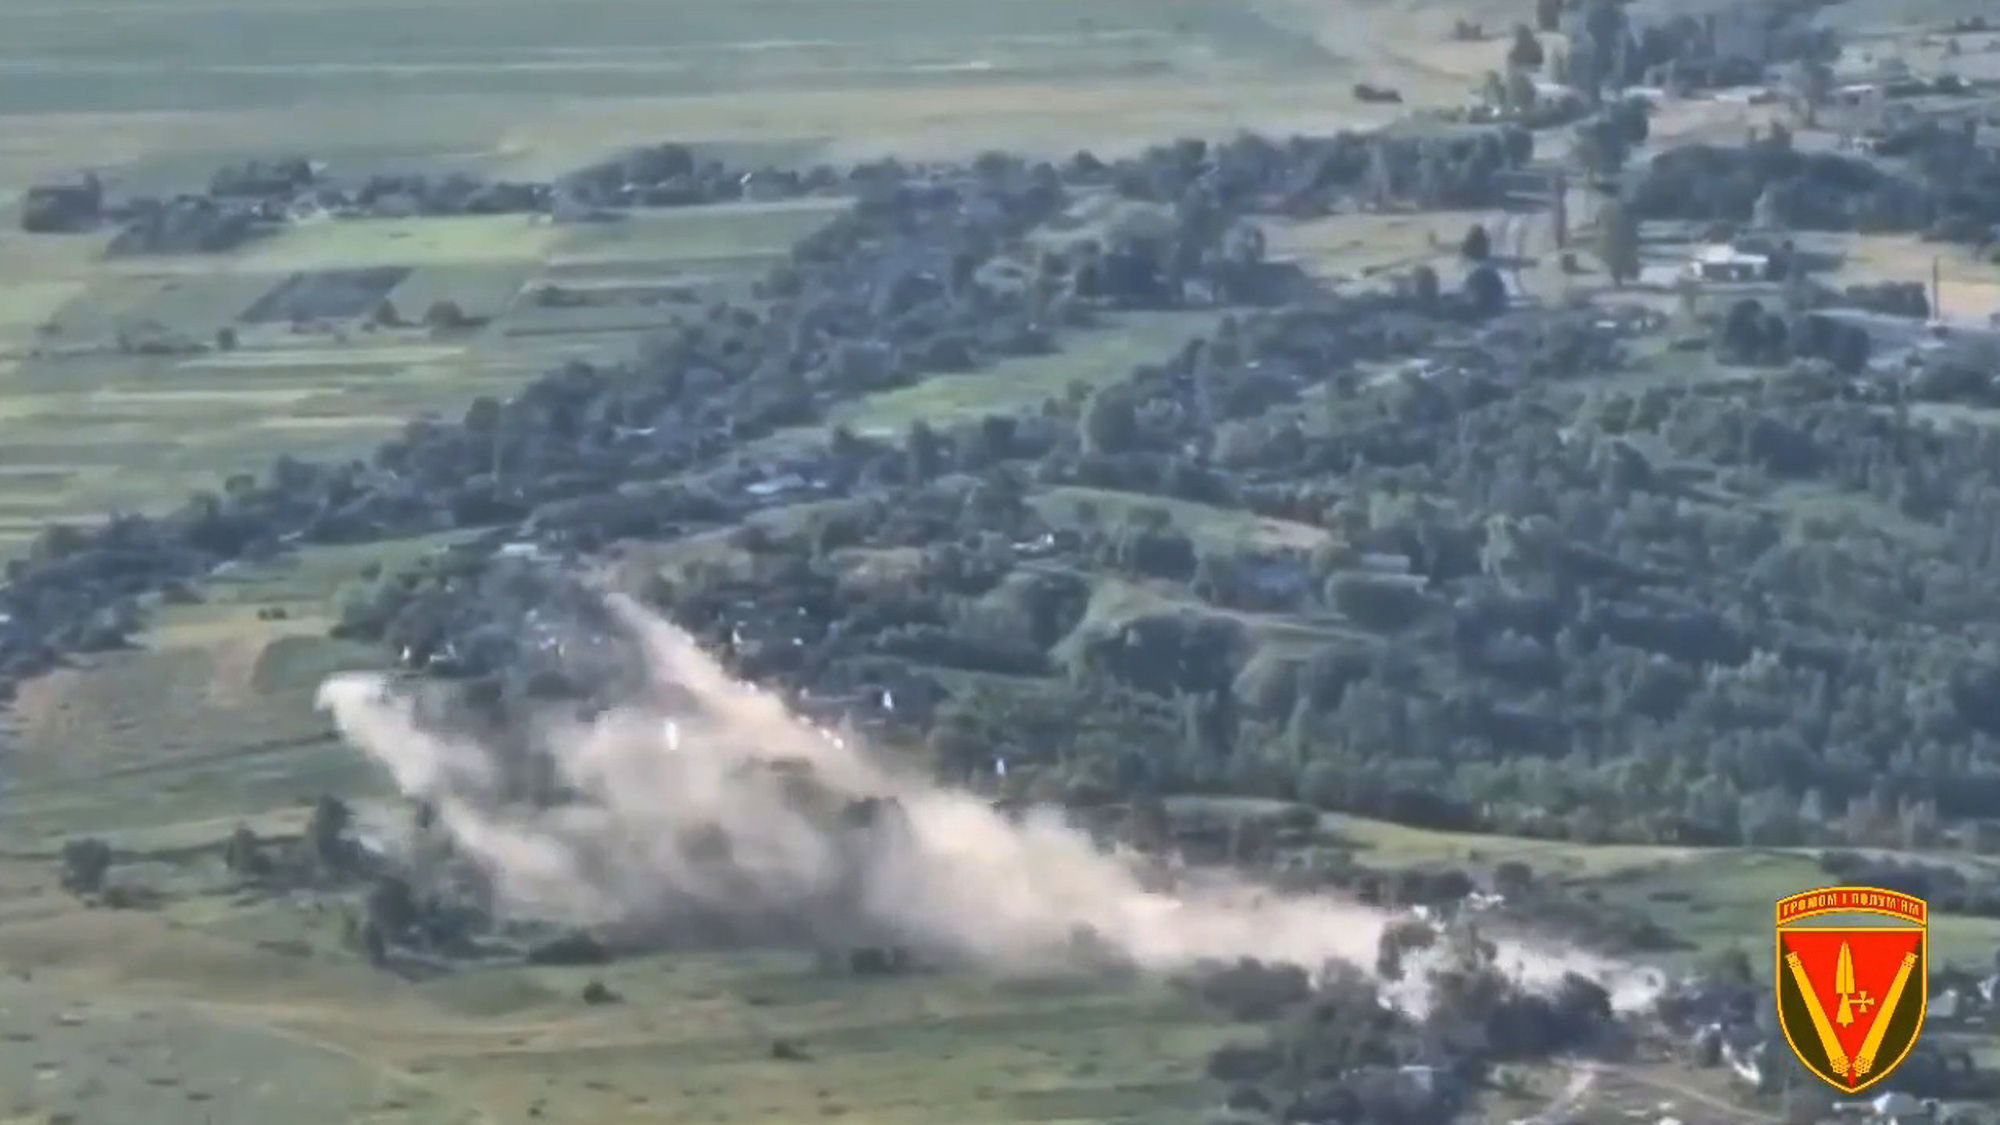 Ukrainian forces destroy the Russian unit hiding in the trees